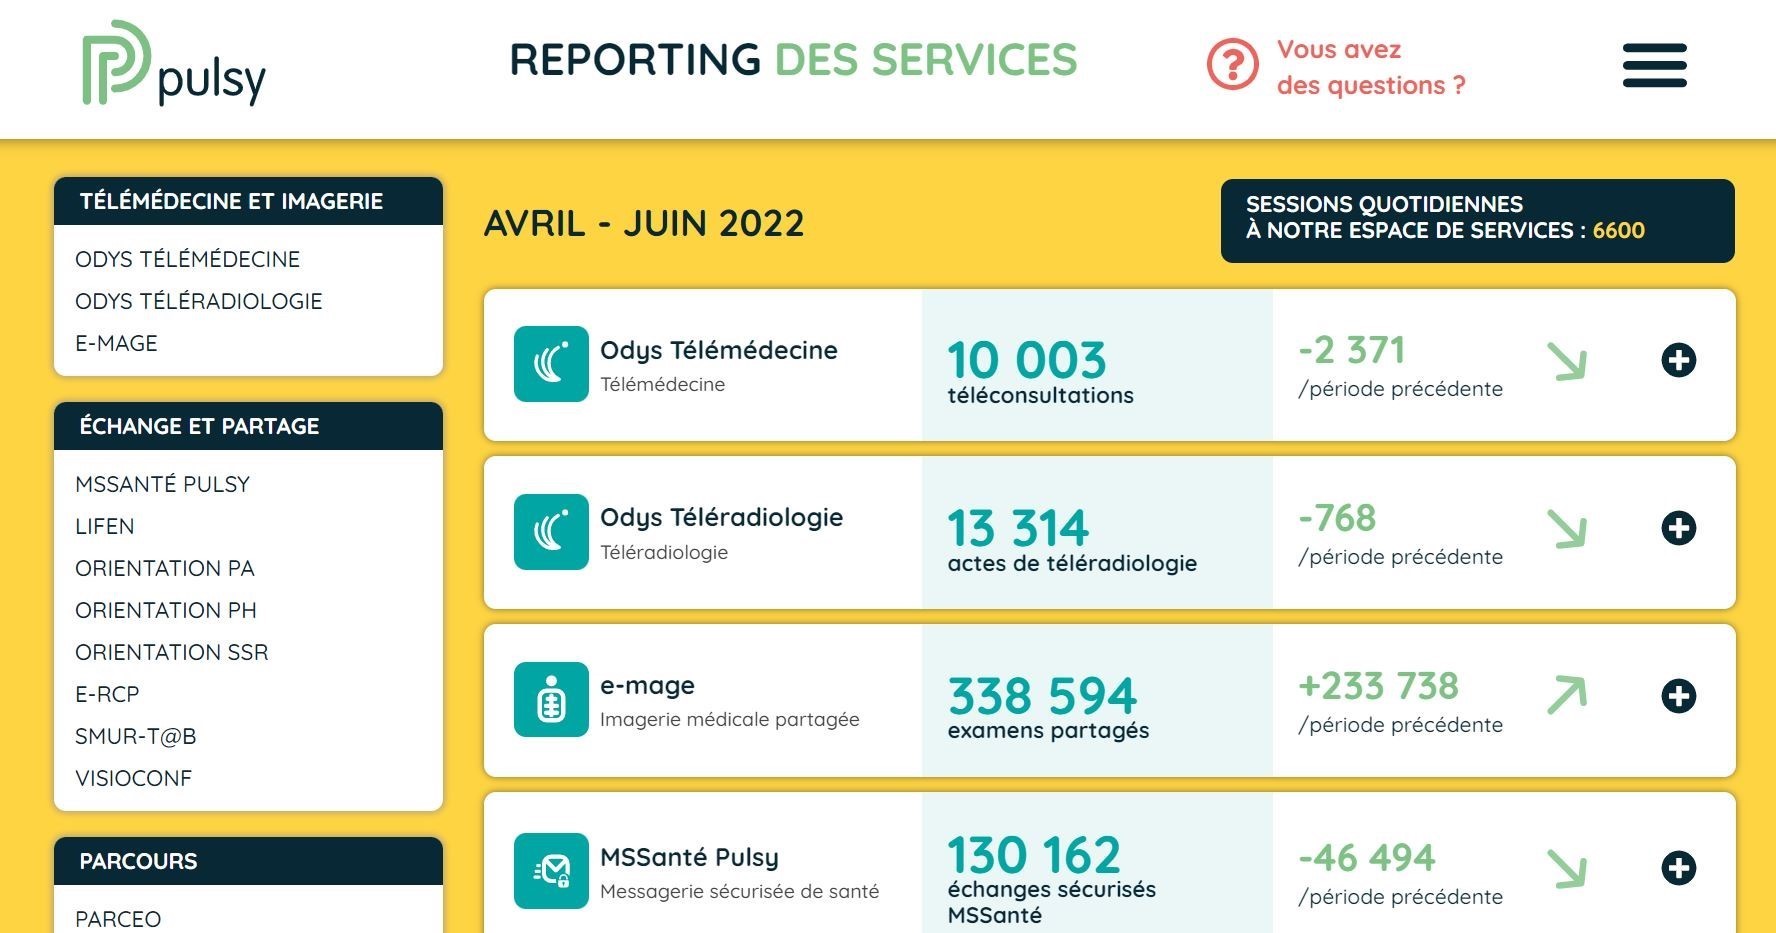 Reporting des services Pulsy